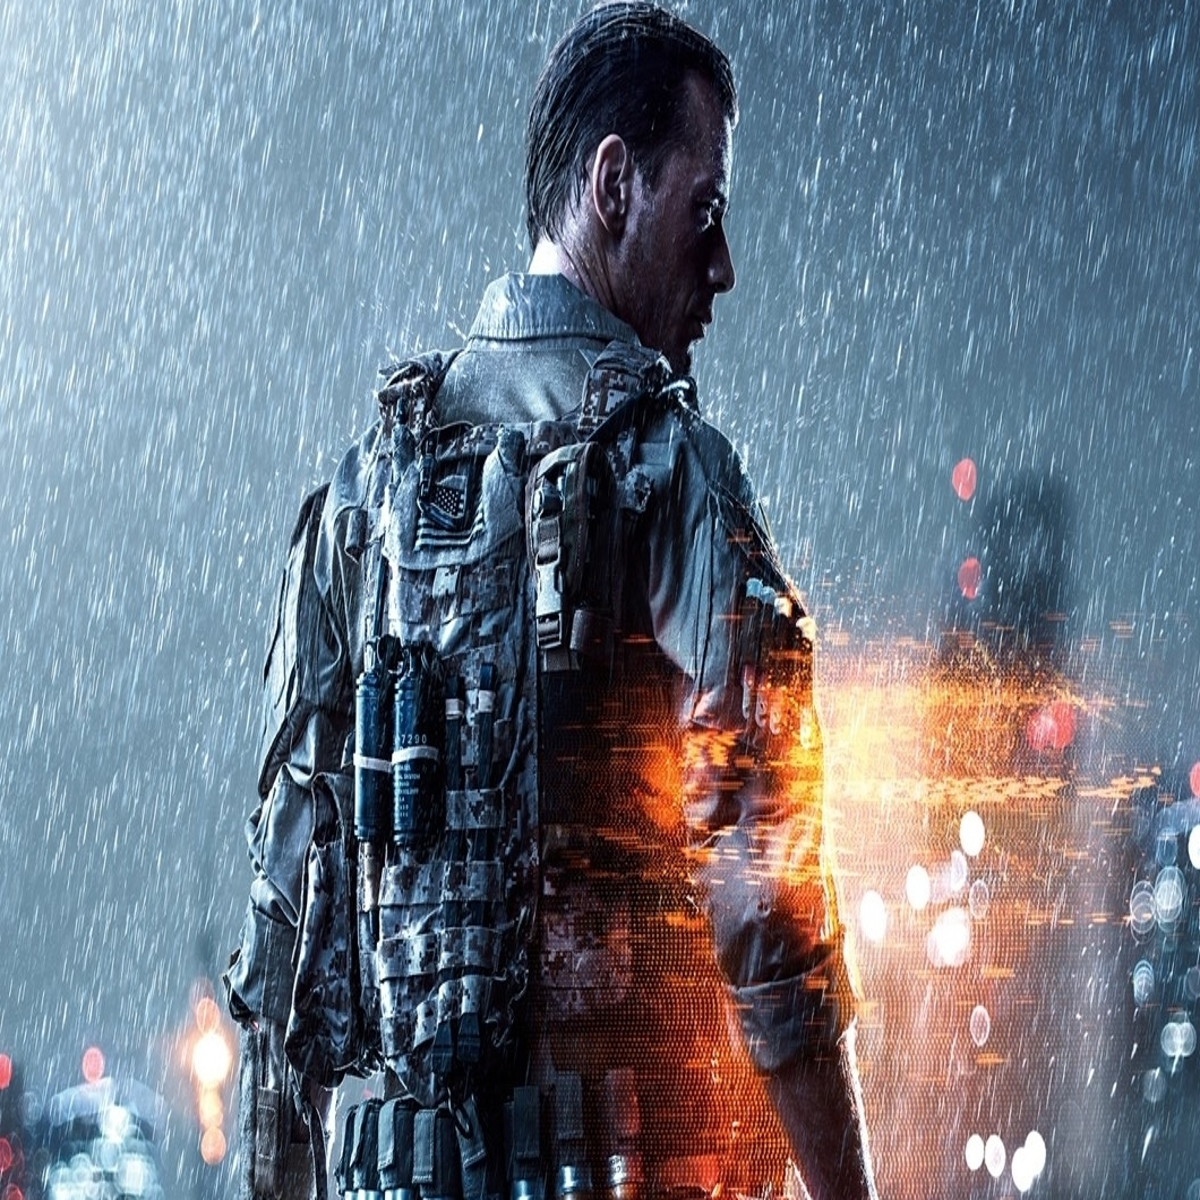  Battlefield 4 - PlayStation 4 : Electronic Arts: Movies